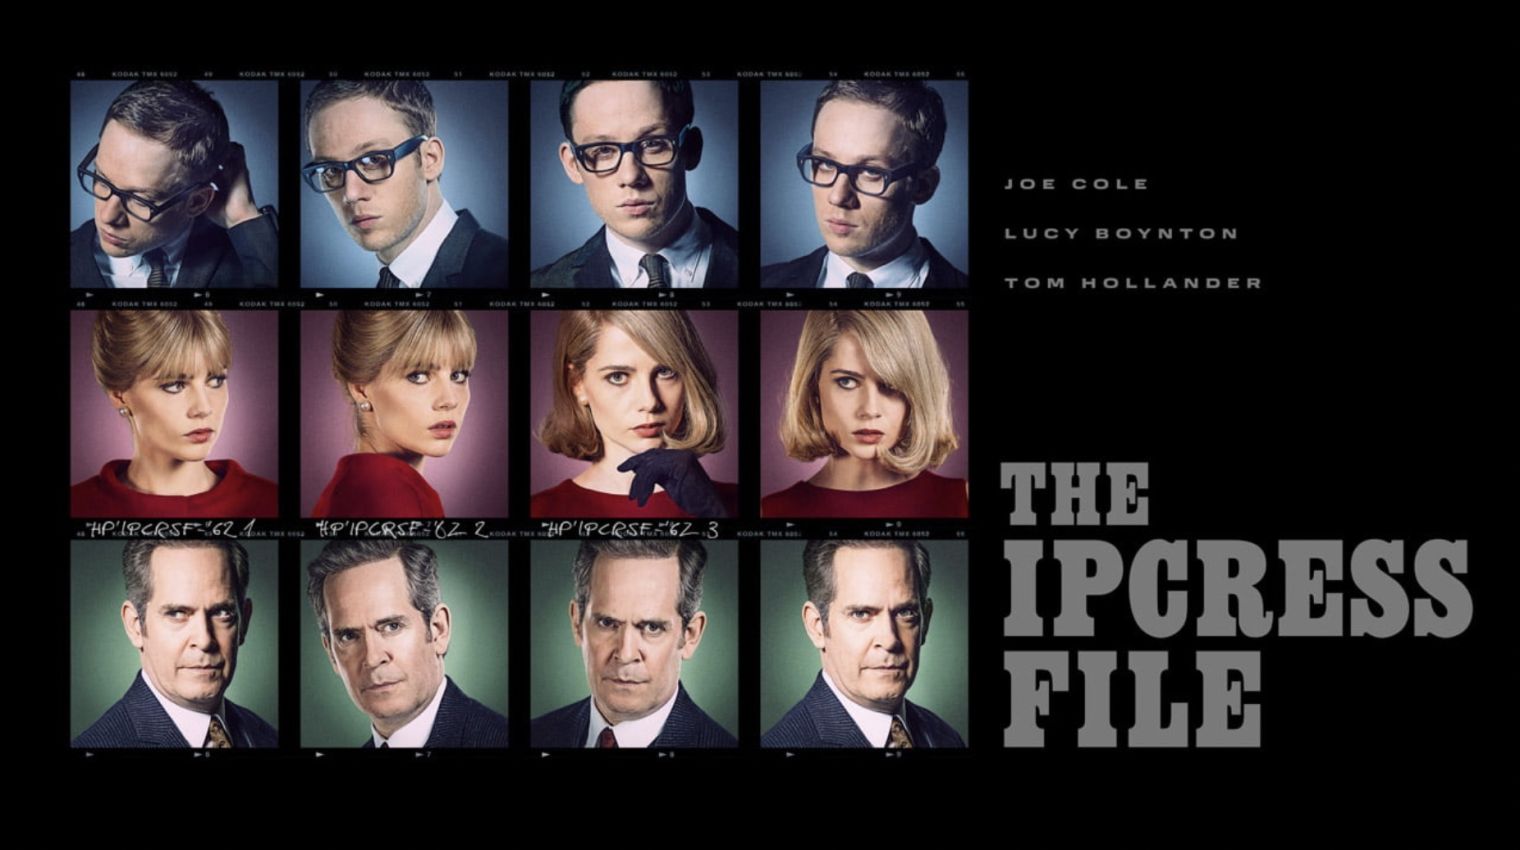 Look out for Paddy Wallace in Sunday night's episode of The Ipcress File